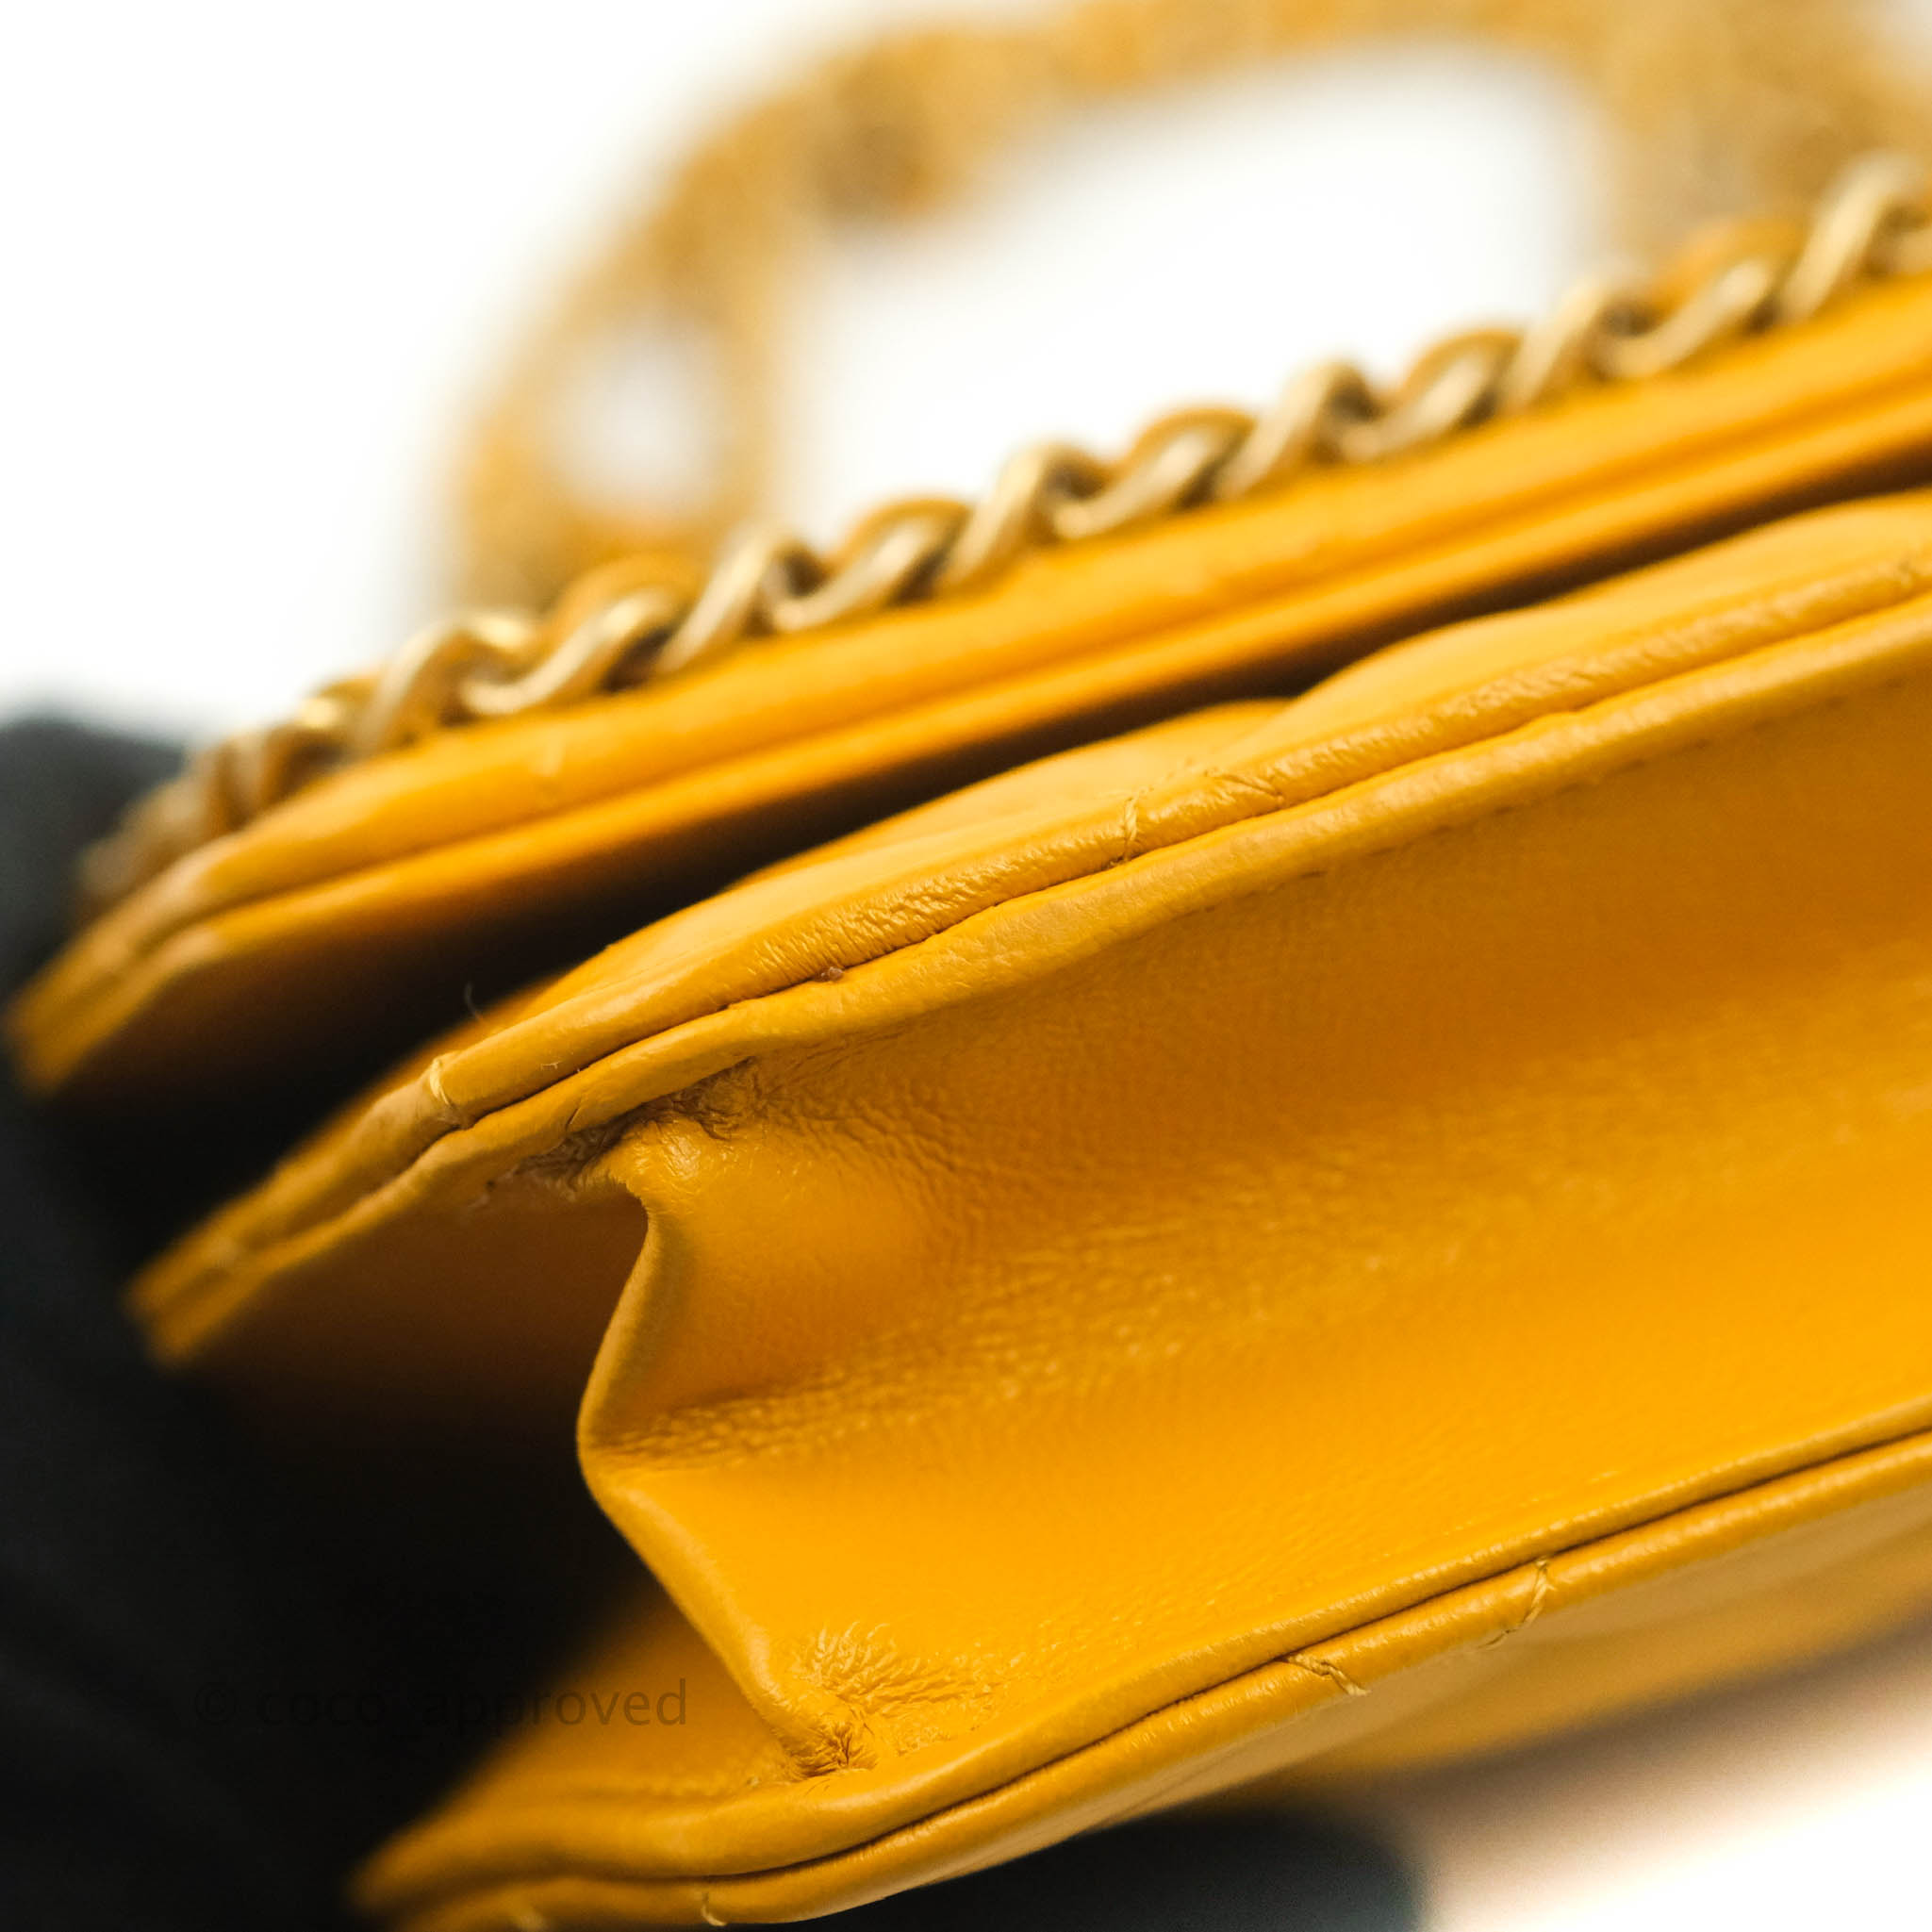 Chanel Quilted Classic Chain Around WOC Yellow Lambskin Aged Gold